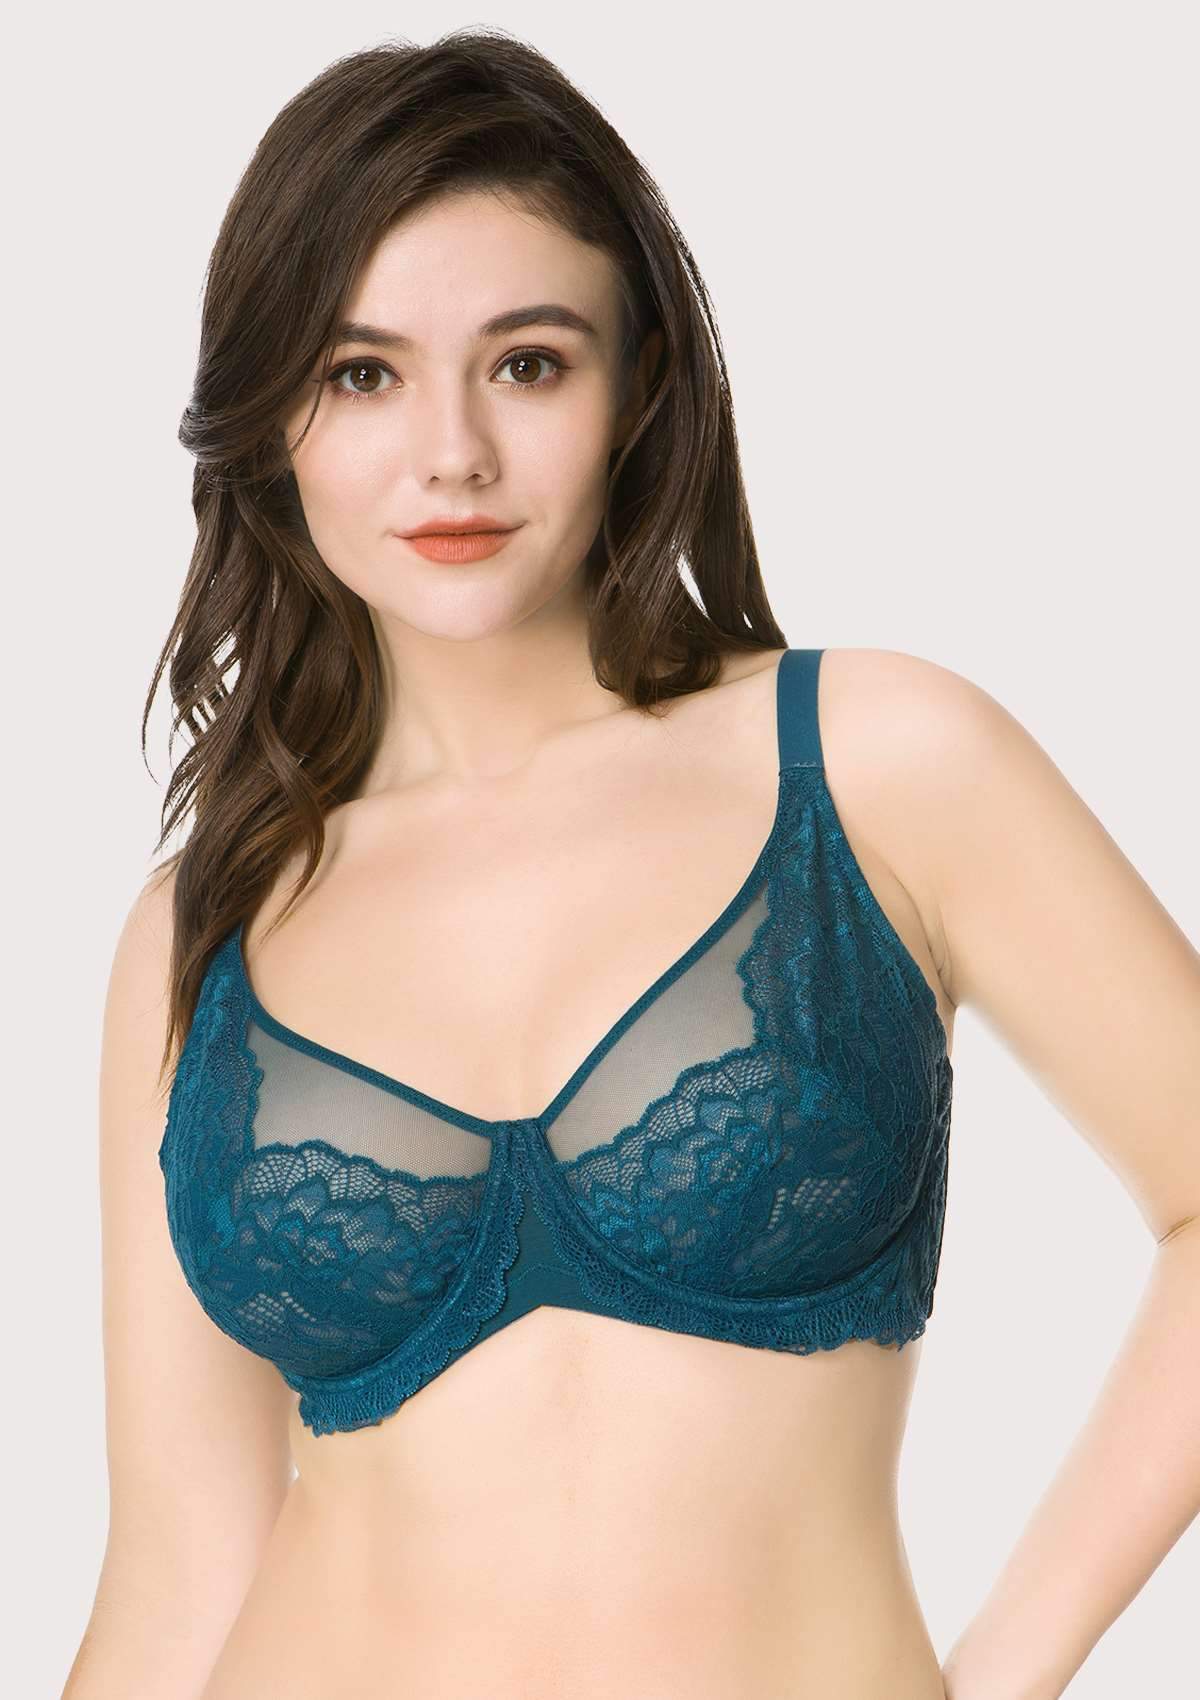 HSIA Peony Lace Unlined Supportive Underwire Bra - Dark Blue / 36 / C